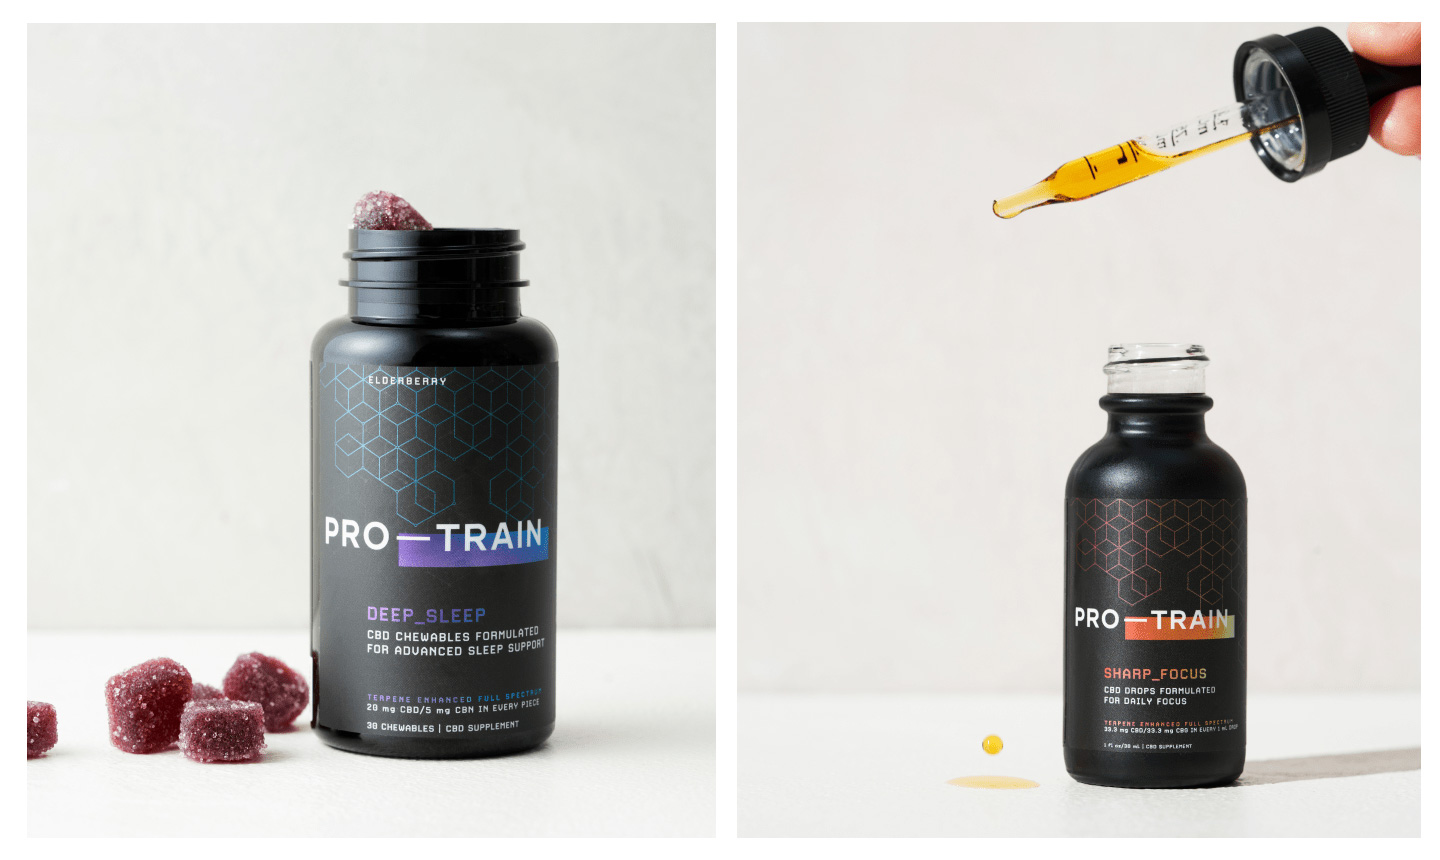 Packaging design for the Pro-Train CBD chewables and drops